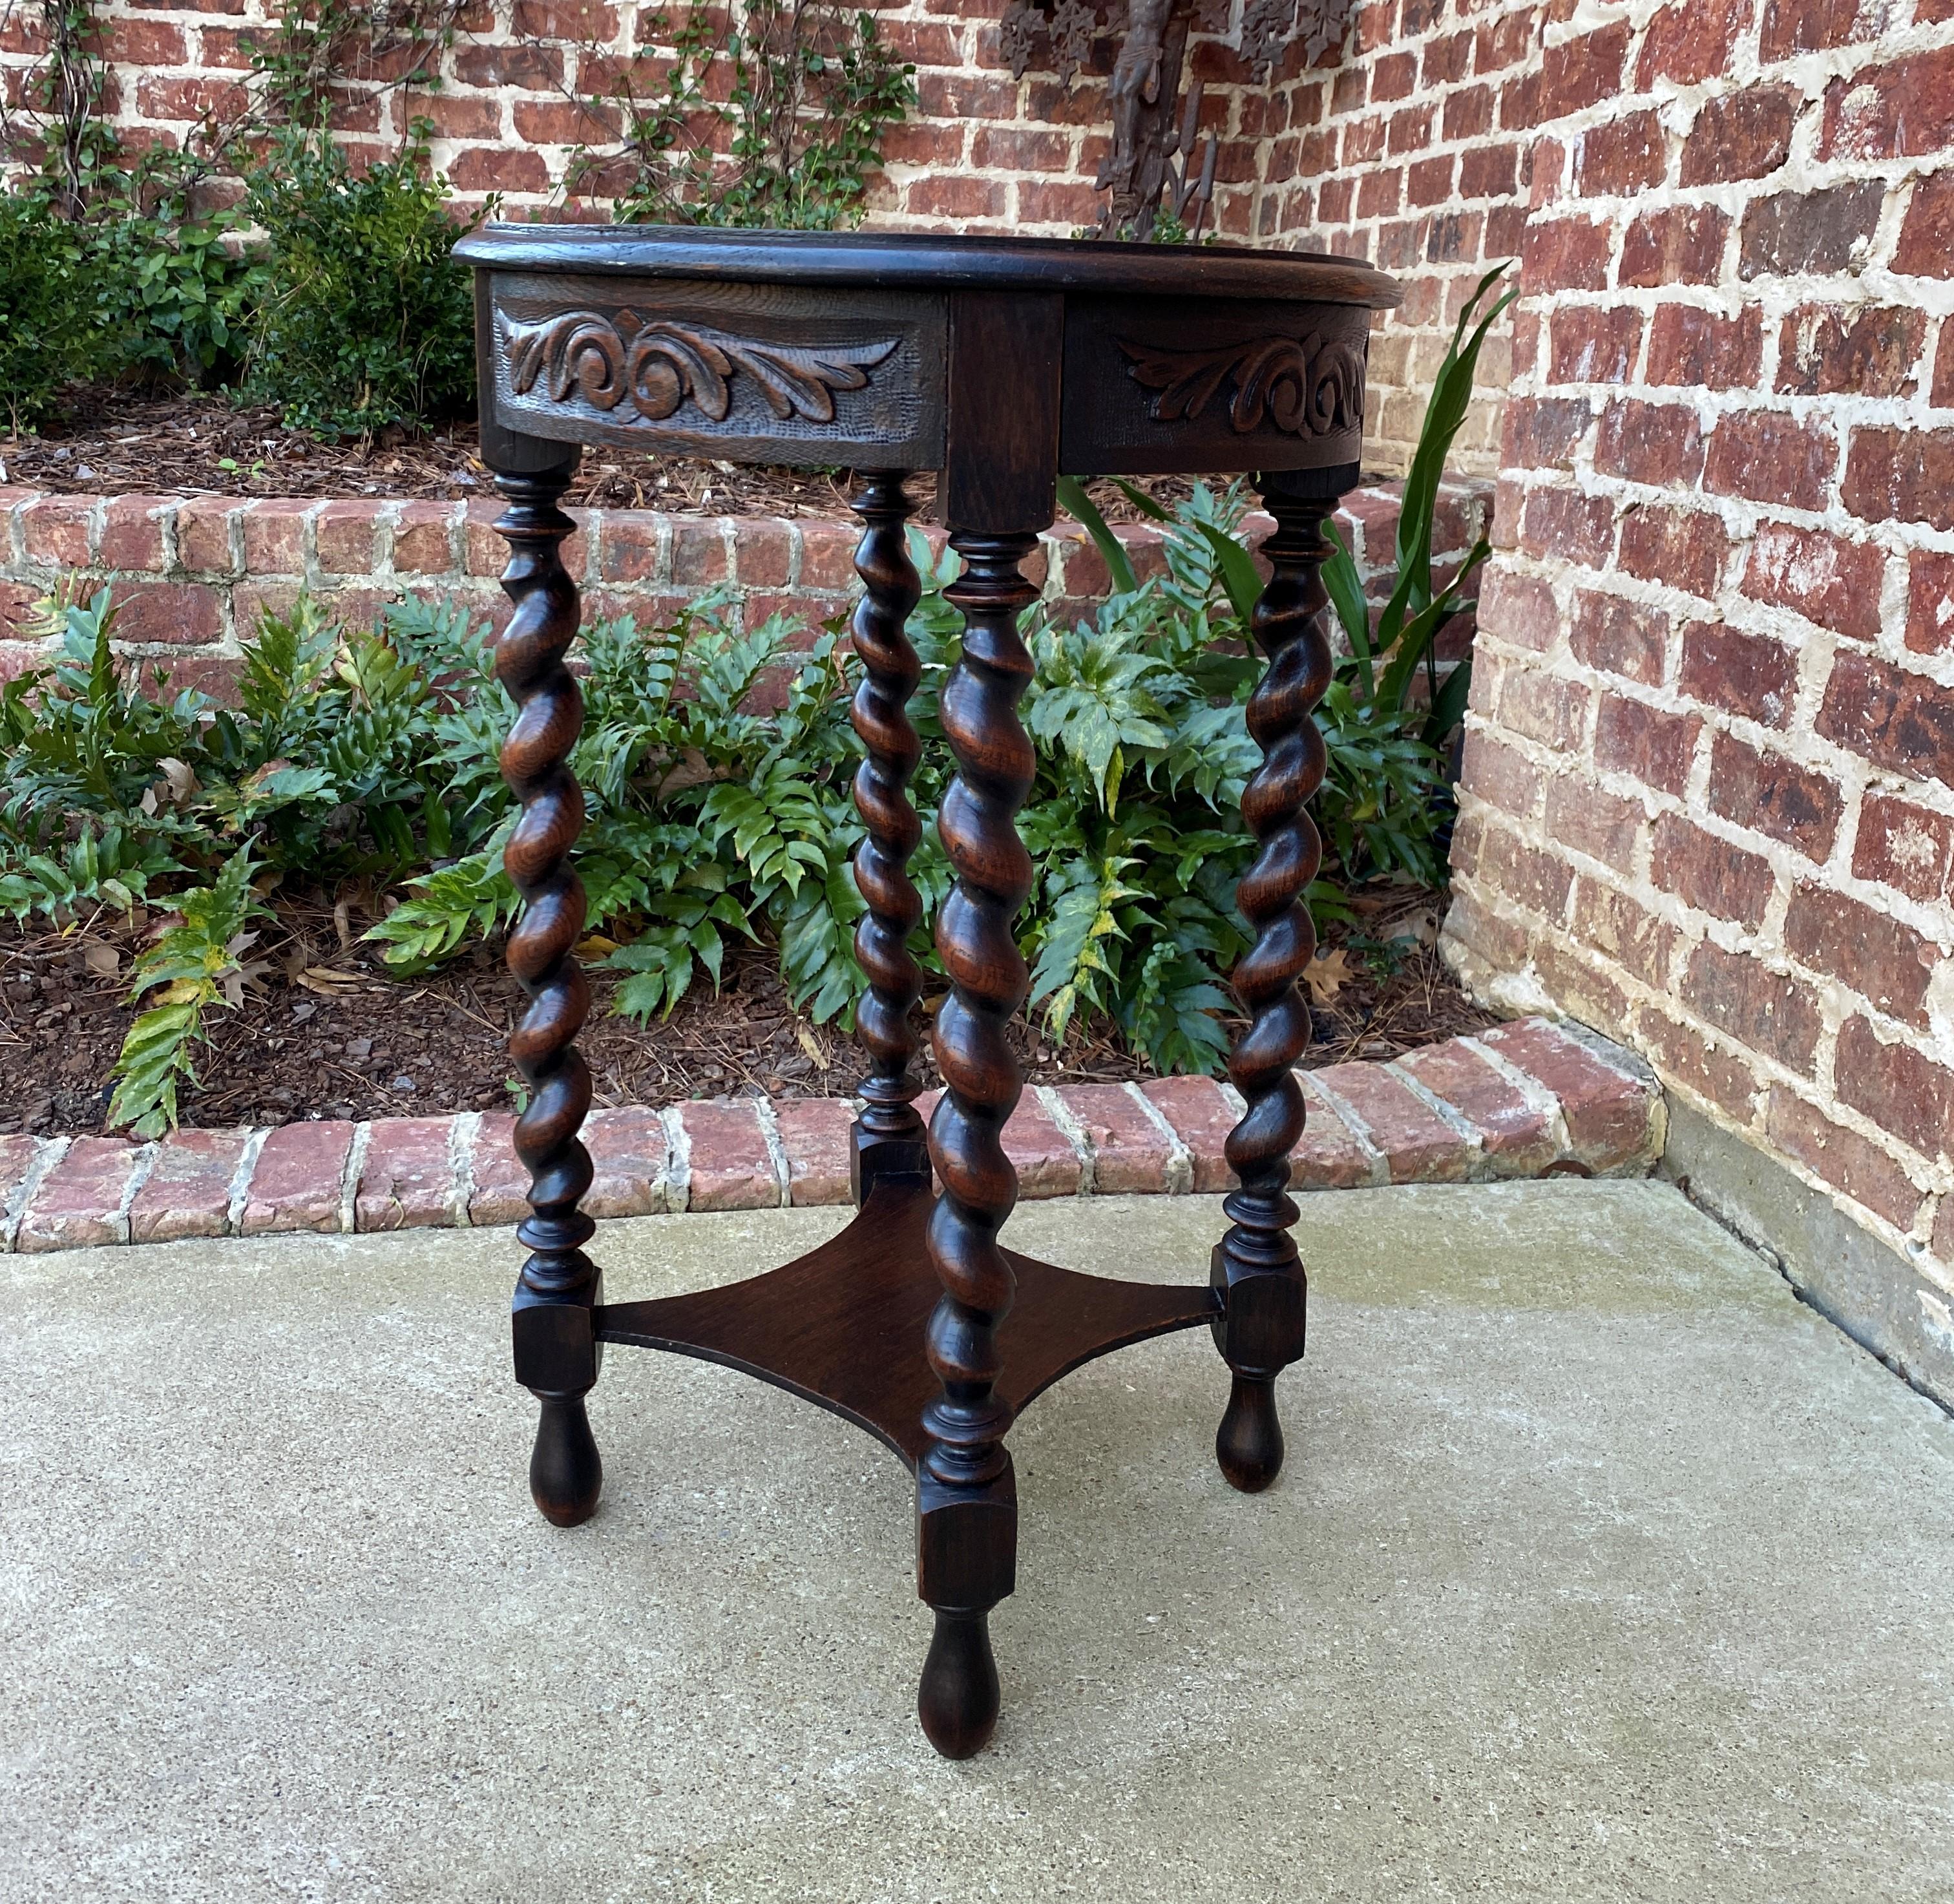 Mid-20th Century Antique English Round Table End Table Occasional Table Barley Twist Oak 2-Tier